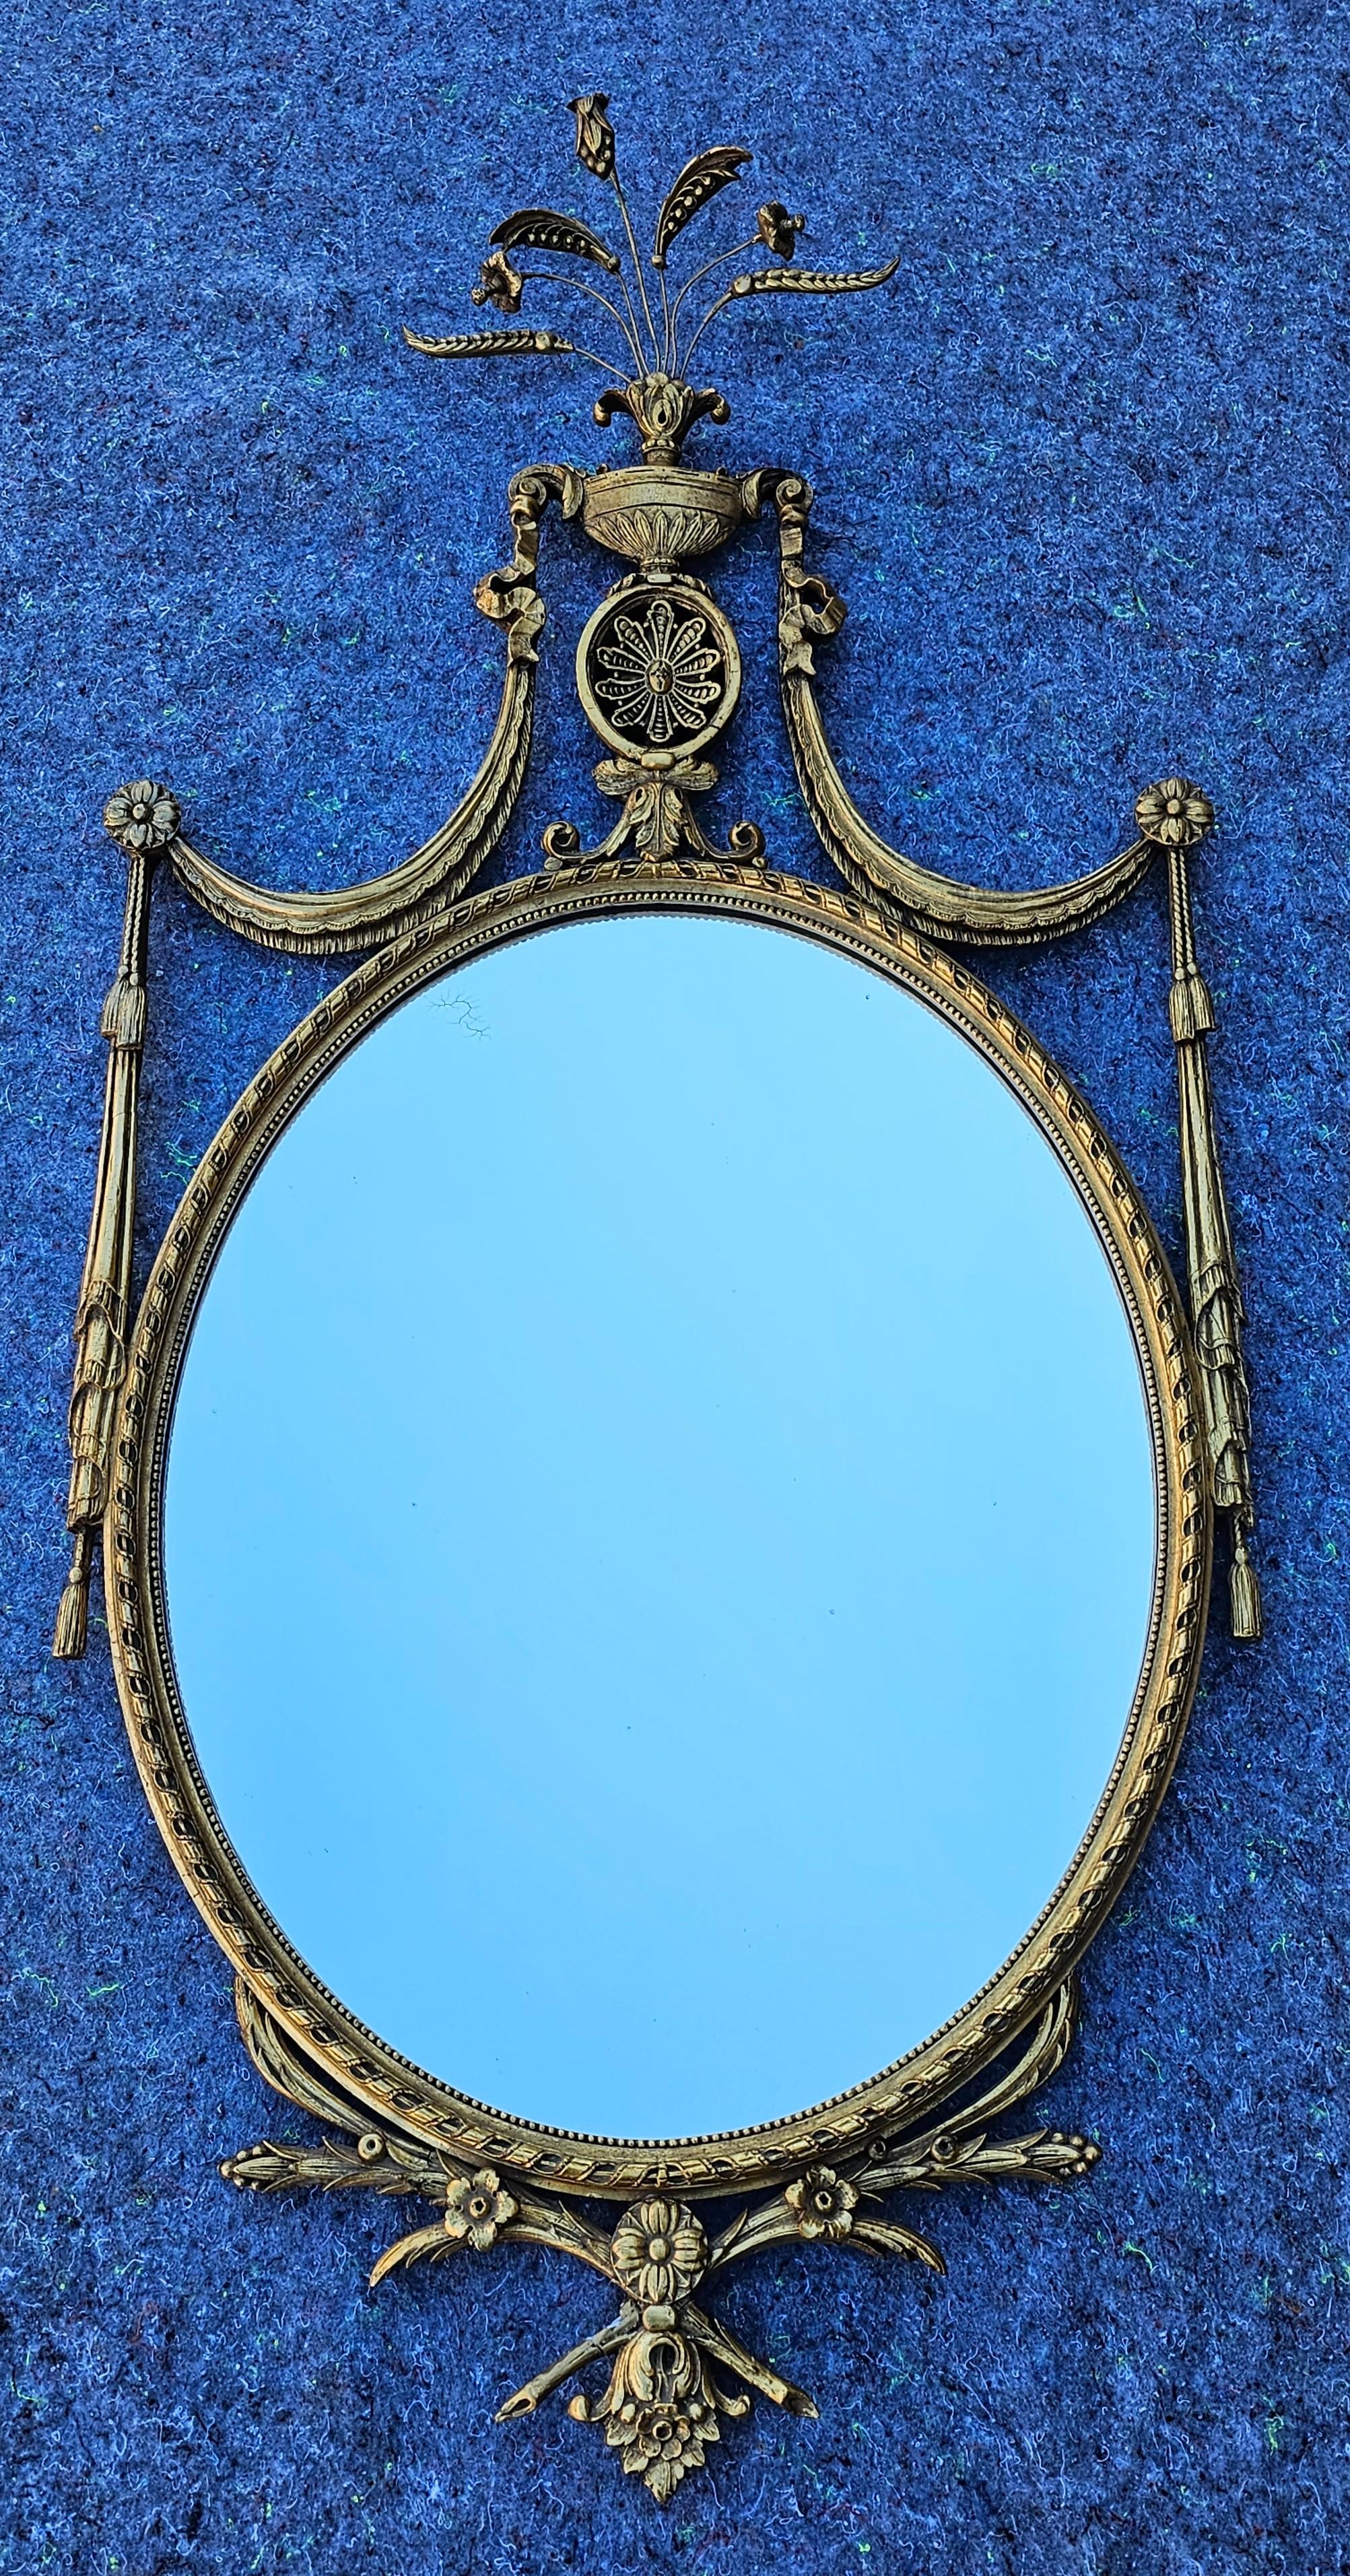 Add refined elegance, luxury, and sophistication to any space with this magnificent antique British Regency era Adam style carved giltwood wall mirror. circa 1800

Exquisitely hand carved in the early 19th century, gessoed, water gilded finish with